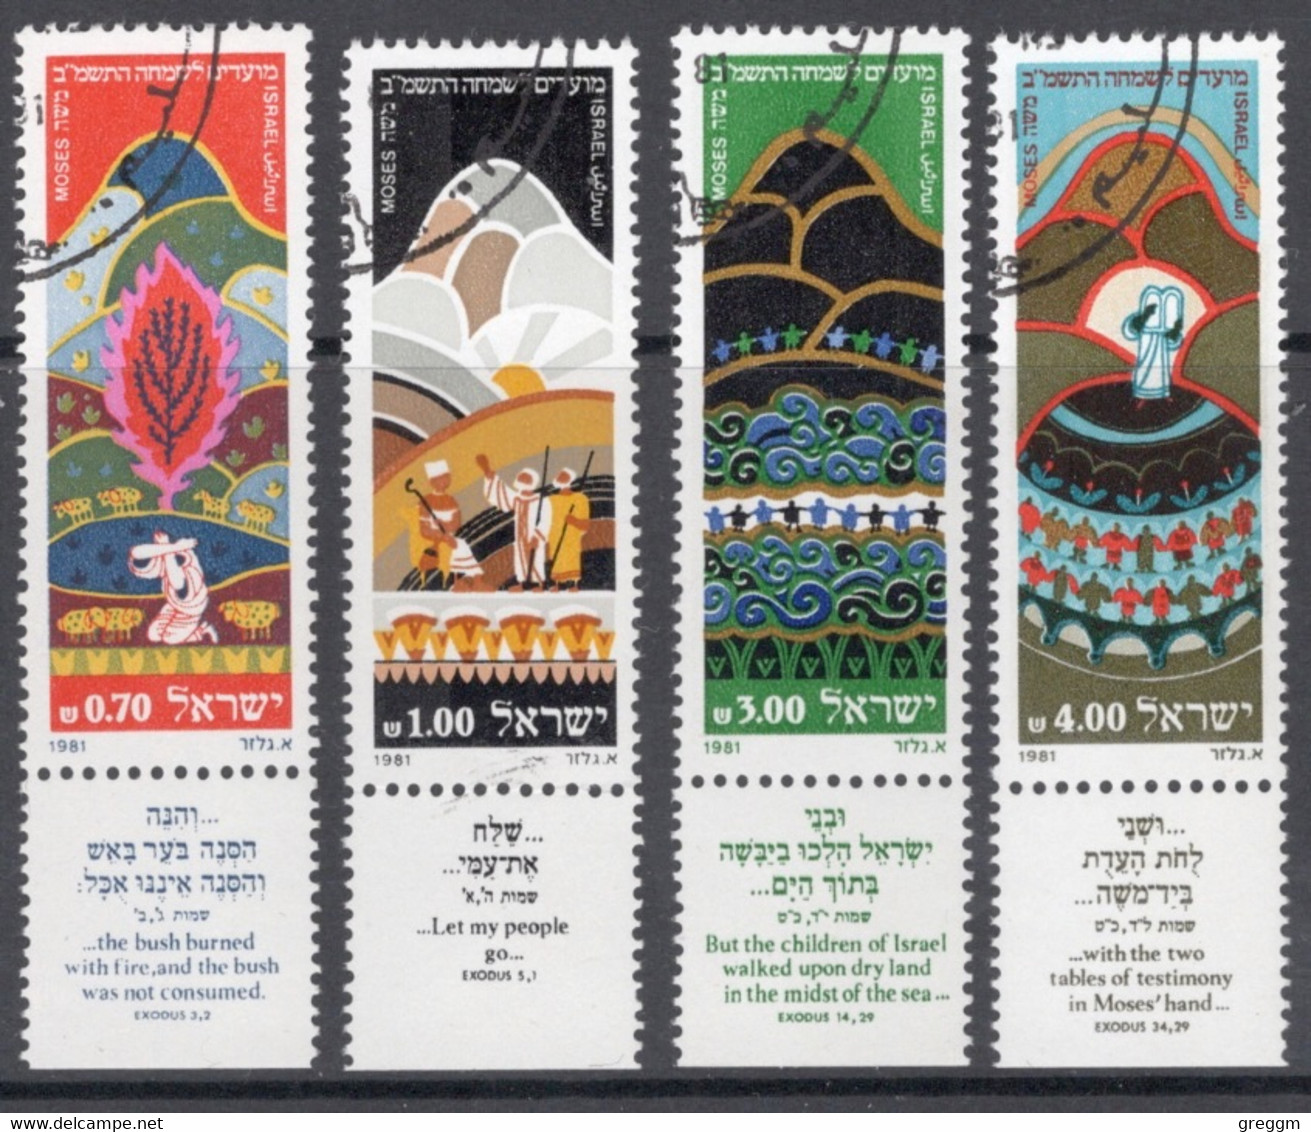 Israel 1981 Set Of Stamps Celebrating New Year In Fine Used With Tabs - Gebraucht (mit Tabs)